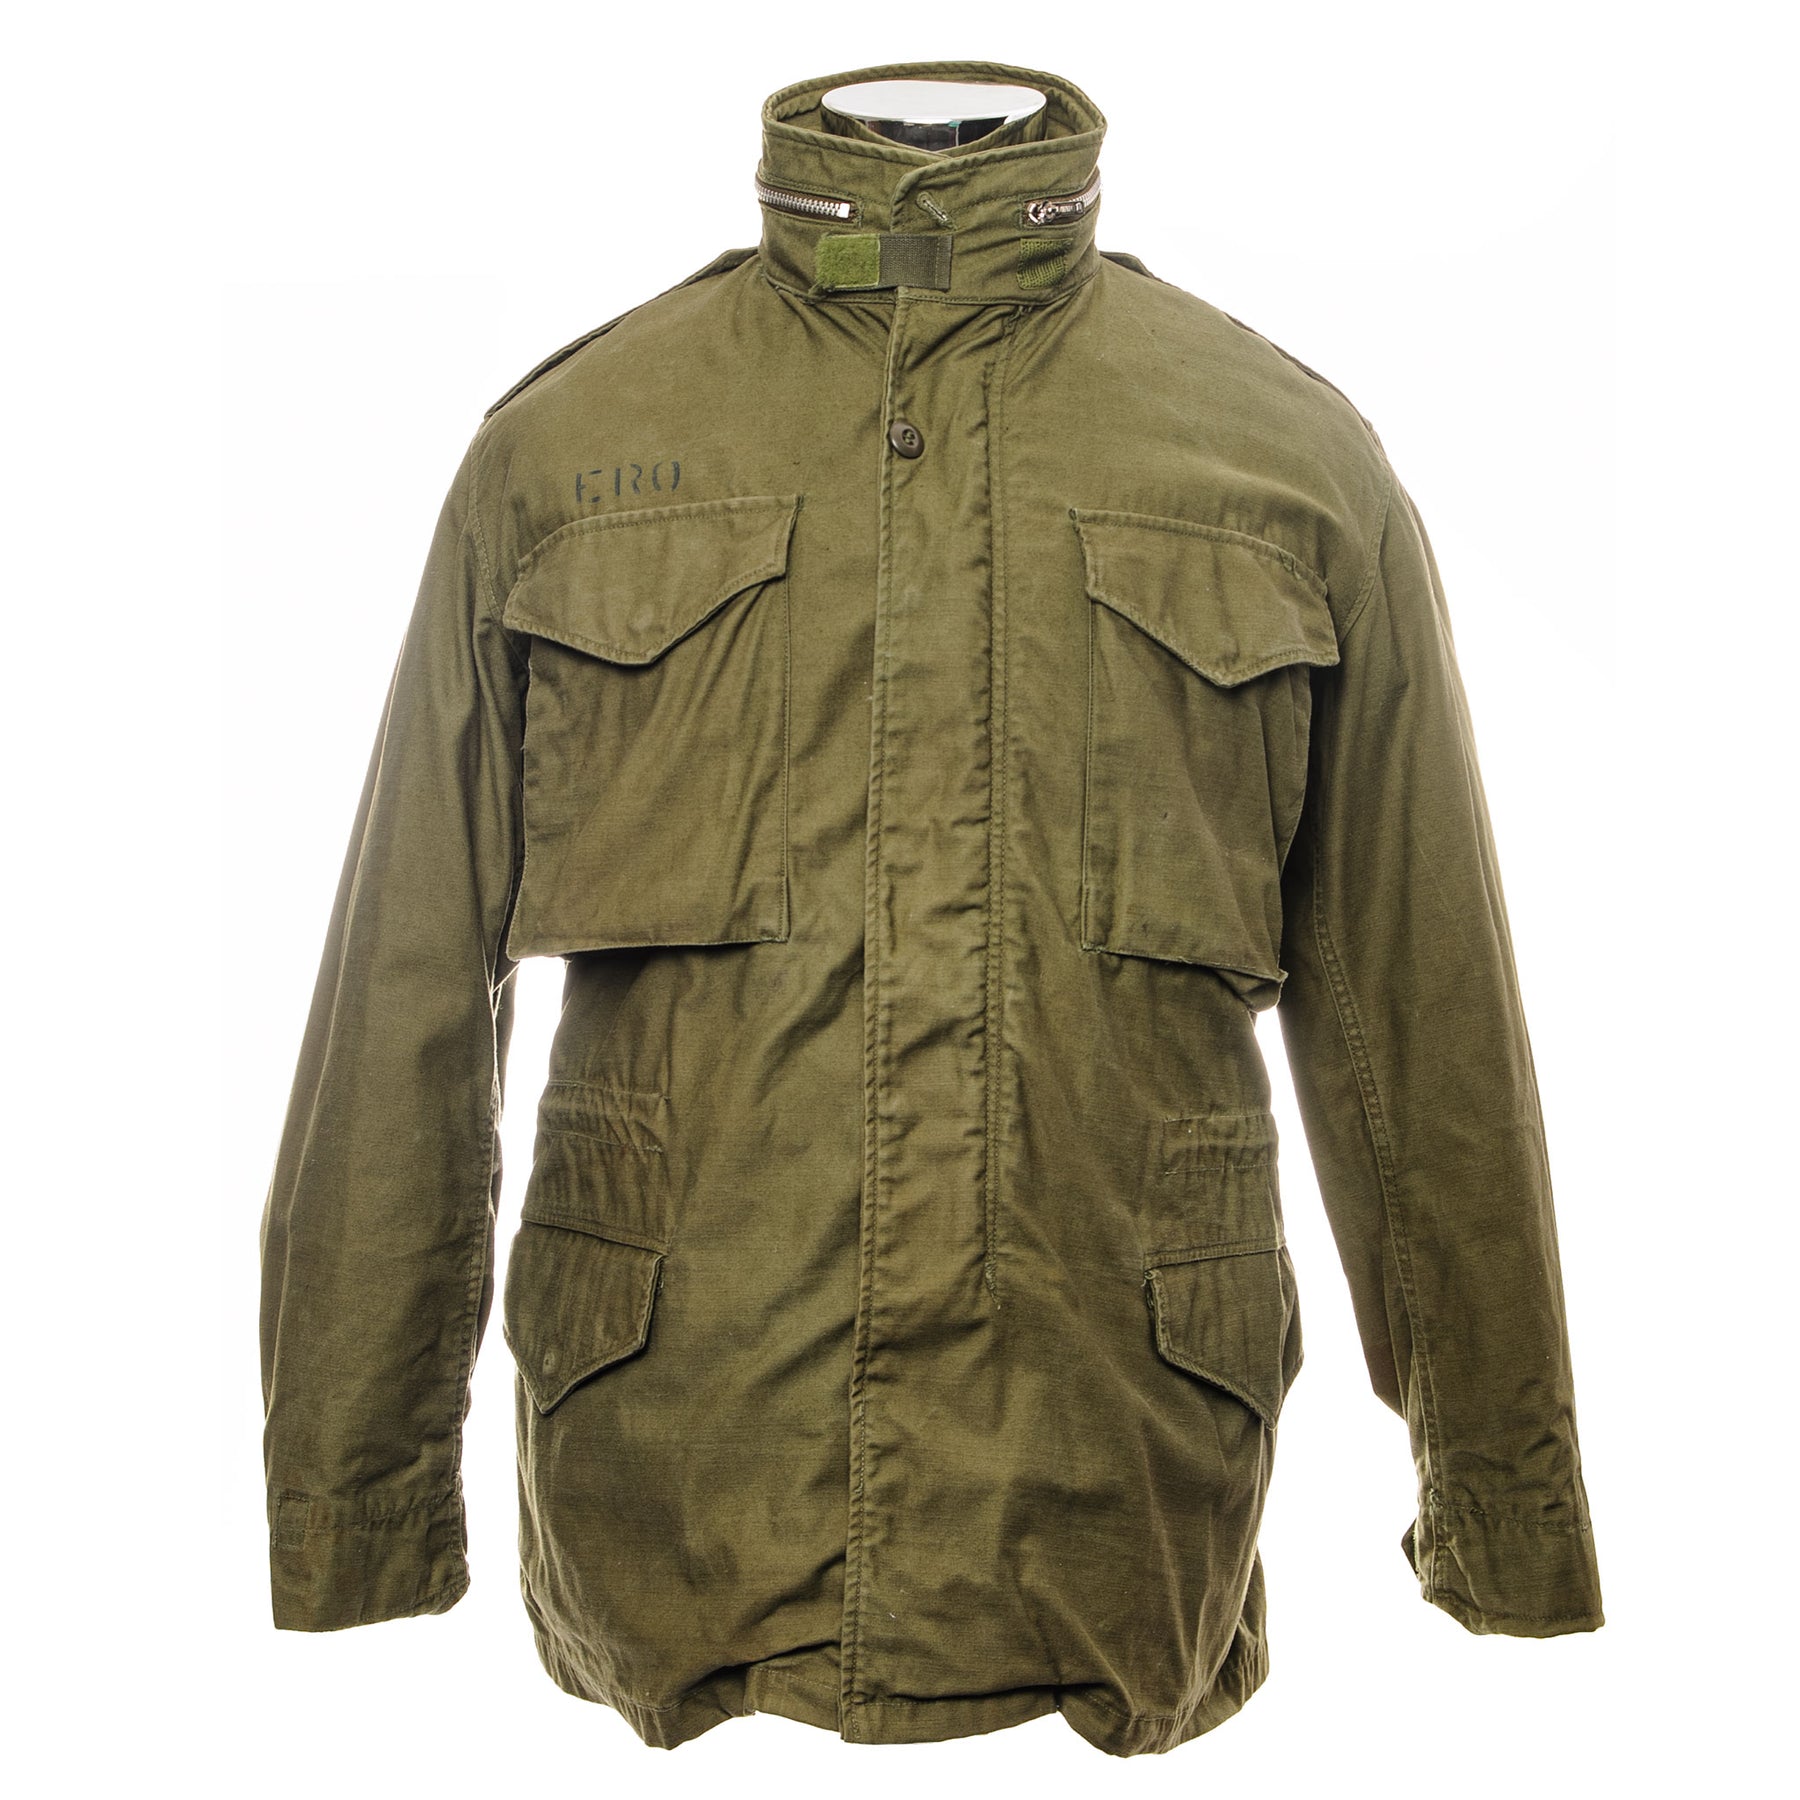 Vintage Army Jacket | VINTAGE US Army Jackets for Sale – Page 3 – Rare ...